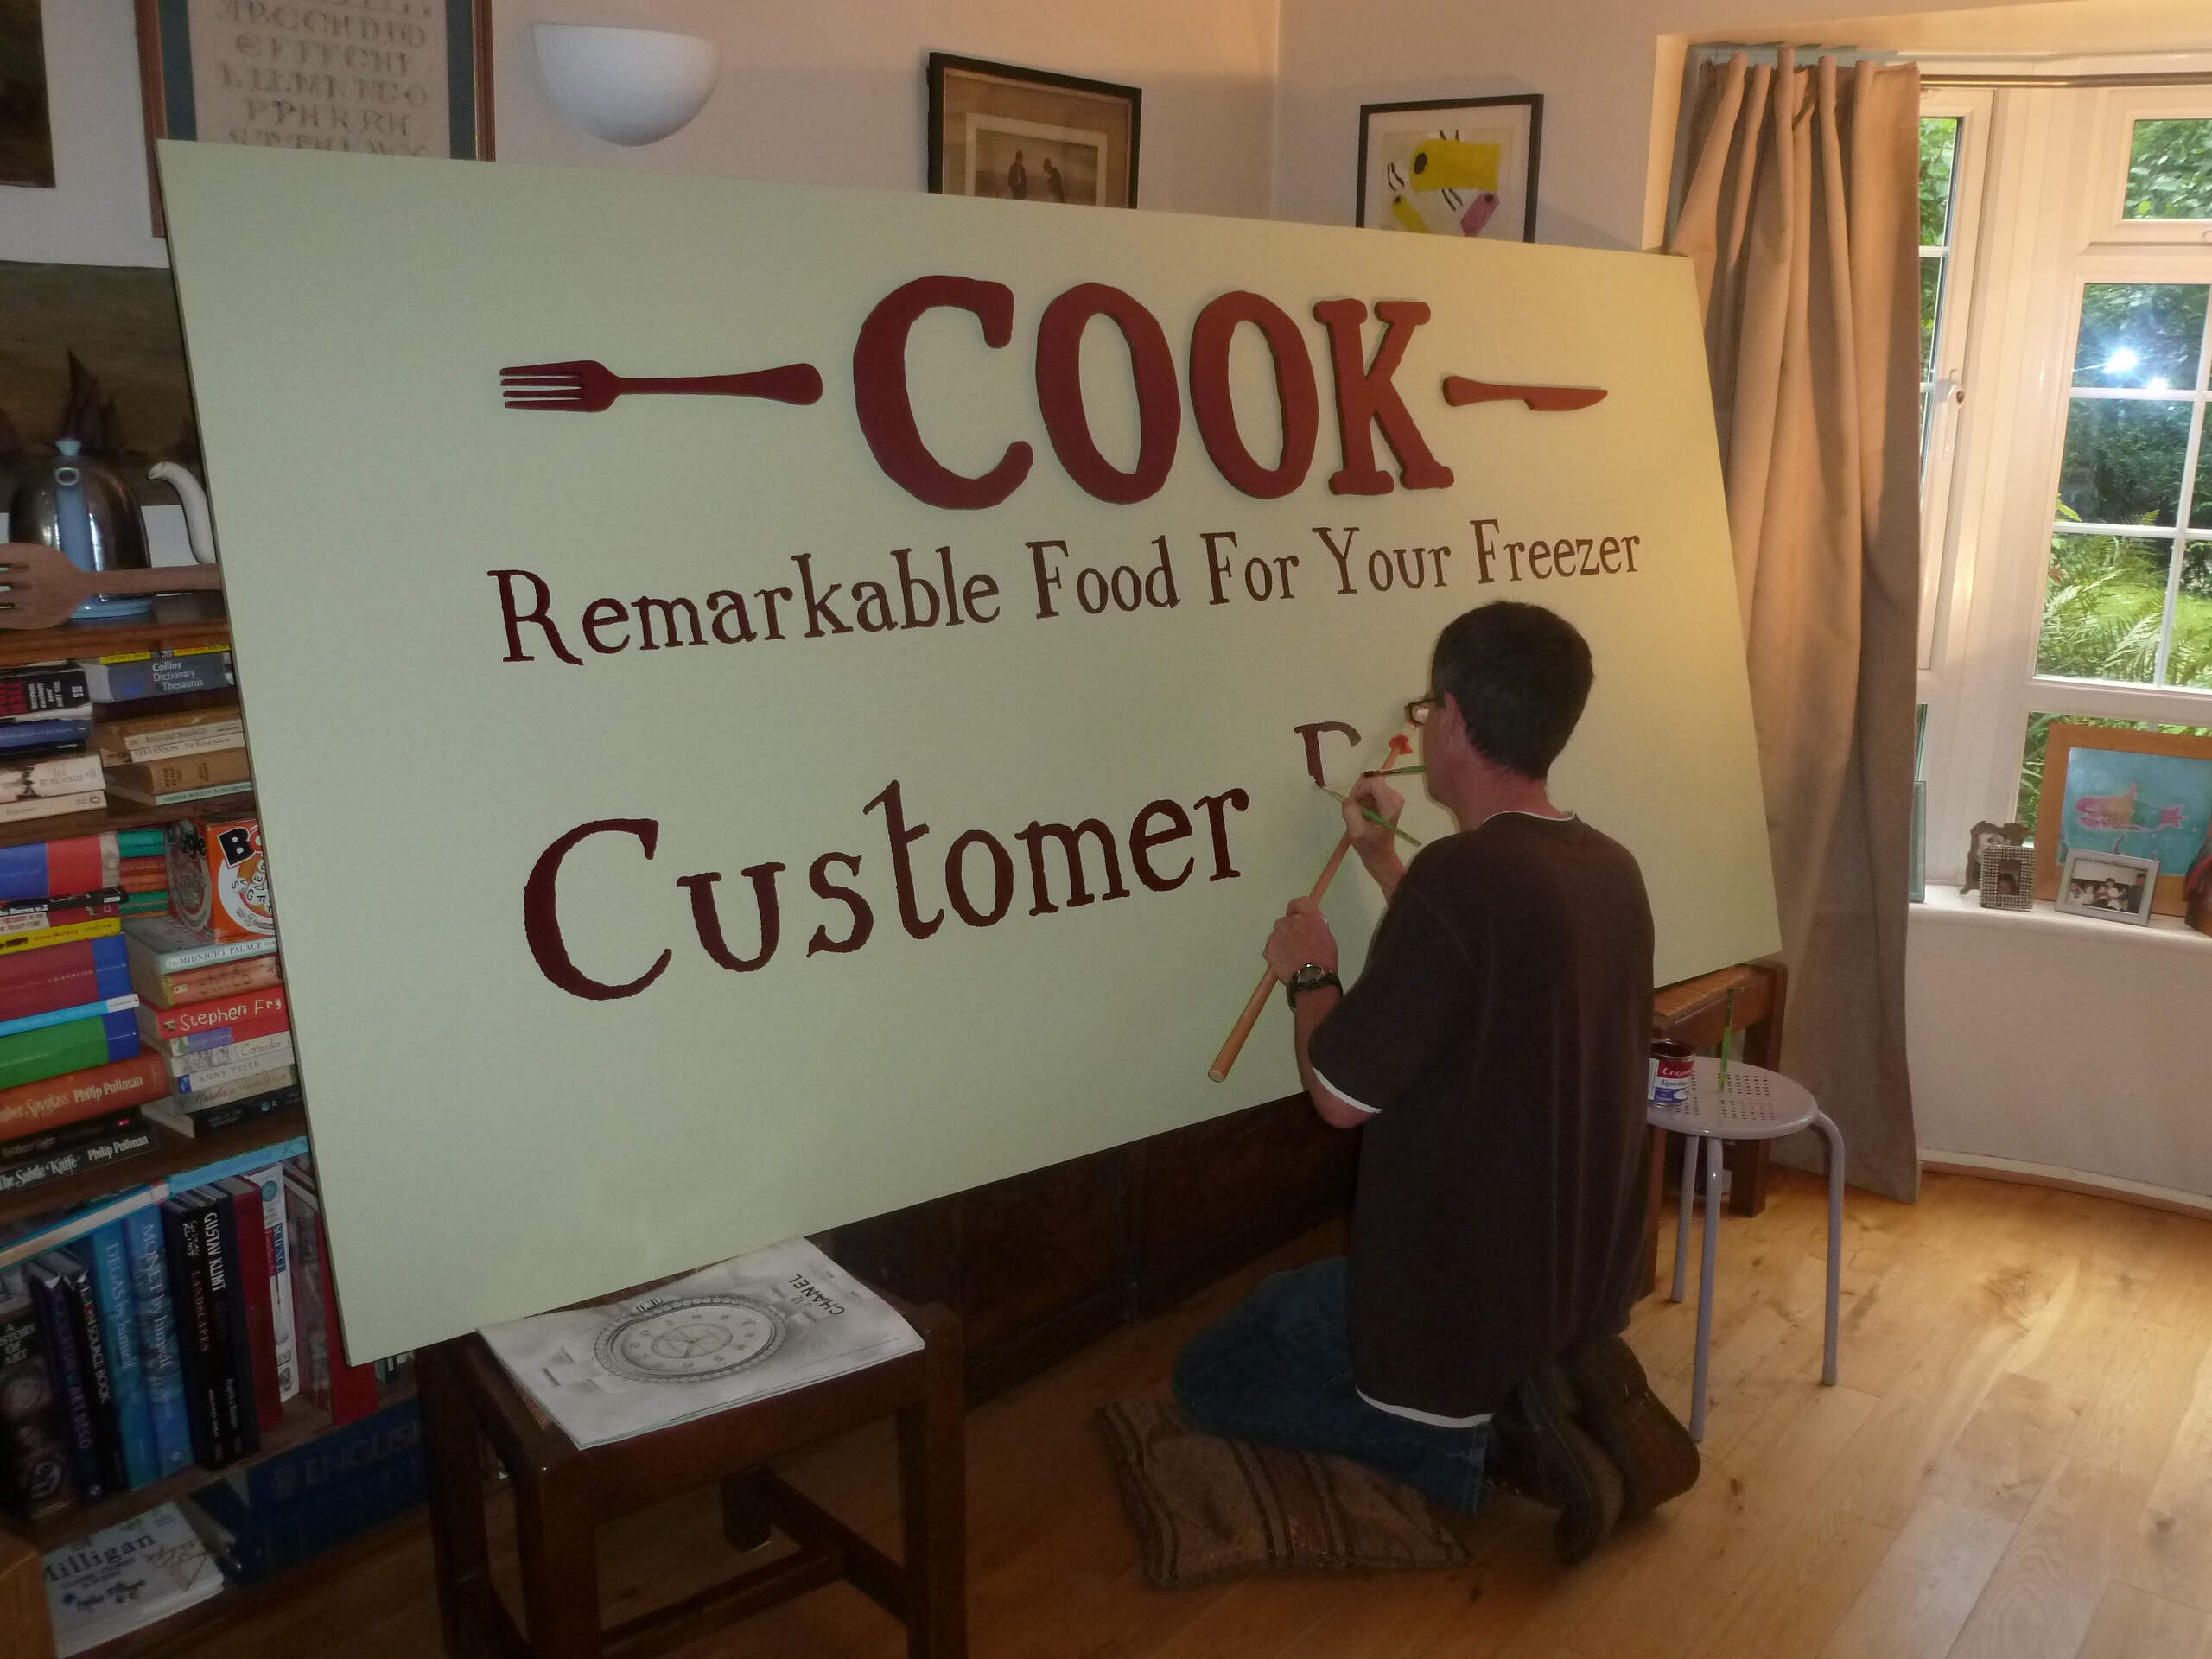 Some 'old school' sign writing